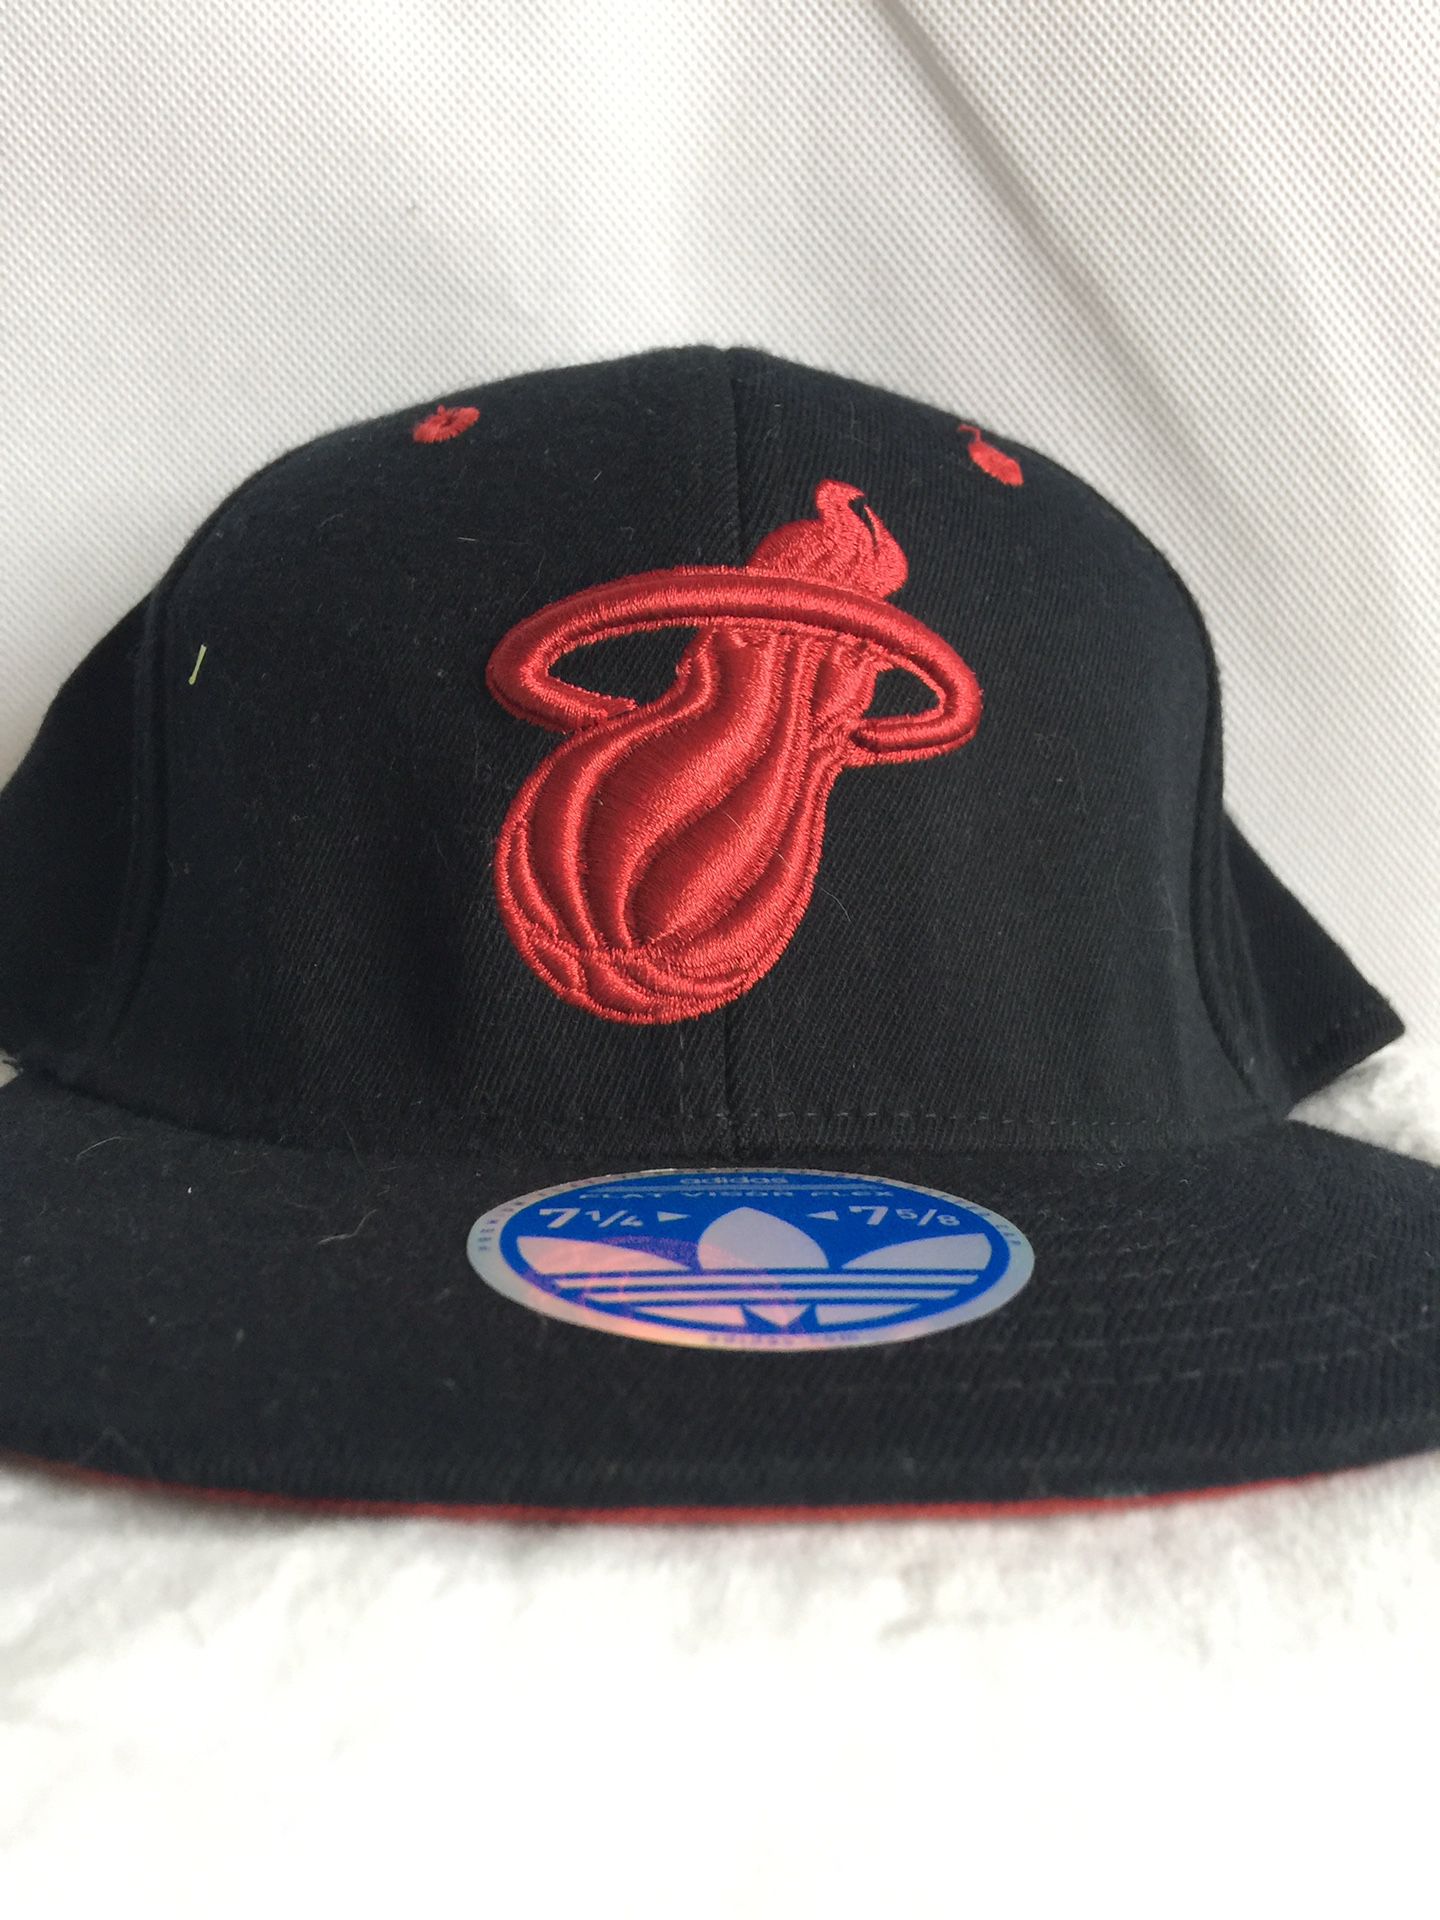 ITEM 13: Miami Heat Adidas Fitted Hat